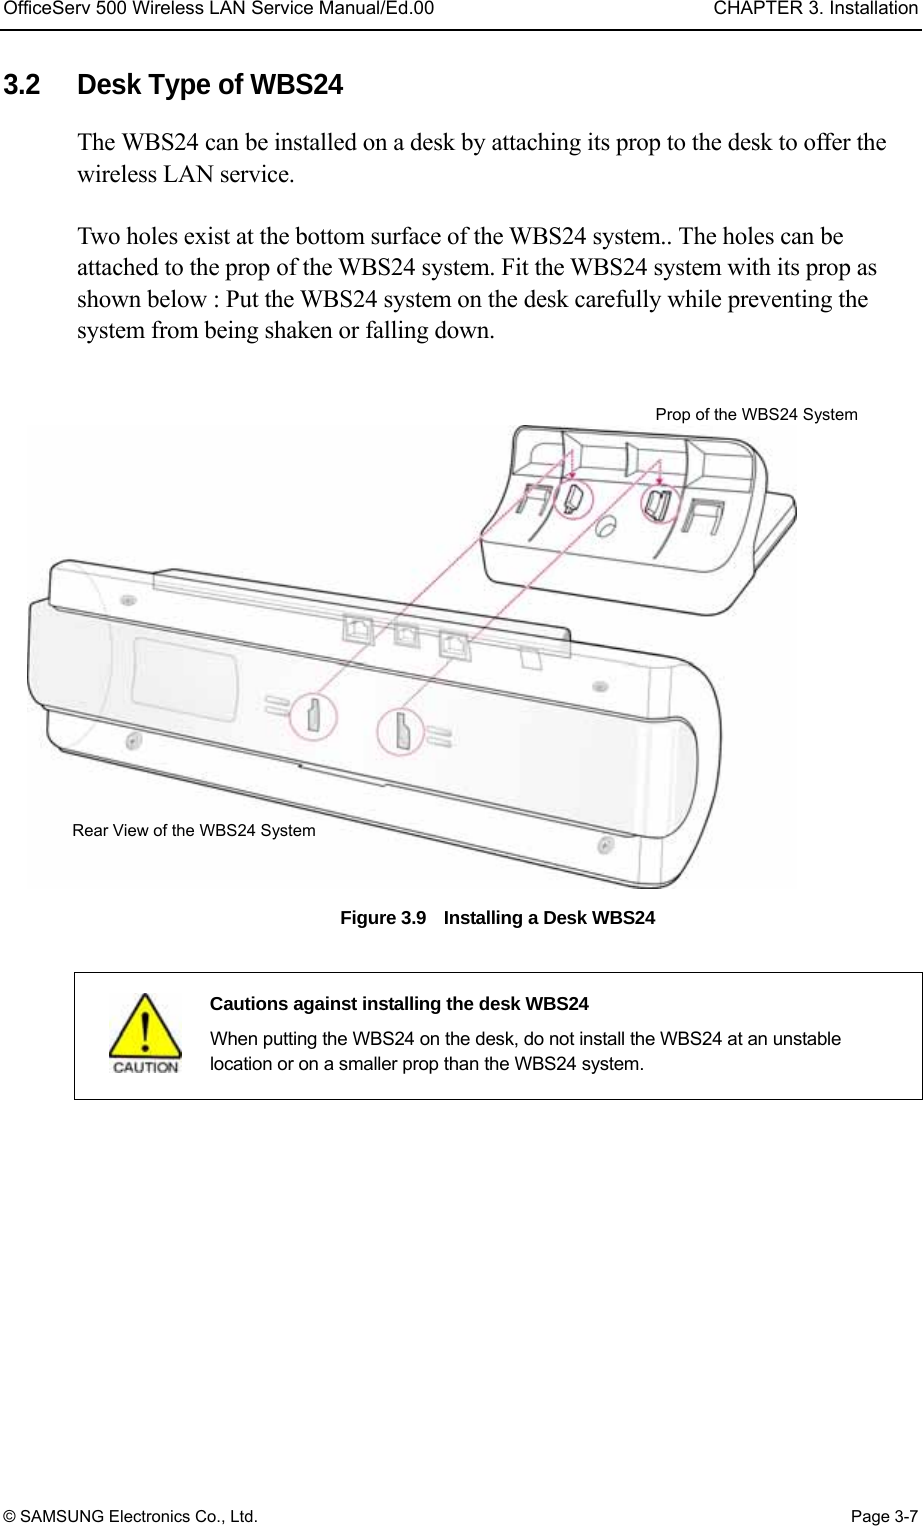 OfficeServ 500 Wireless LAN Service Manual/Ed.00  CHAPTER 3. Installation © SAMSUNG Electronics Co., Ltd.  Page 3-7 3.2  Desk Type of WBS24 The WBS24 can be installed on a desk by attaching its prop to the desk to offer the wireless LAN service.    Two holes exist at the bottom surface of the WBS24 system.. The holes can be attached to the prop of the WBS24 system. Fit the WBS24 system with its prop as shown below : Put the WBS24 system on the desk carefully while preventing the system from being shaken or falling down.  Figure 3.9    Installing a Desk WBS24     Cautions against installing the desk WBS24   When putting the WBS24 on the desk, do not install the WBS24 at an unstable location or on a smaller prop than the WBS24 system.      Rear View of the WBS24 System Prop of the WBS24 System 